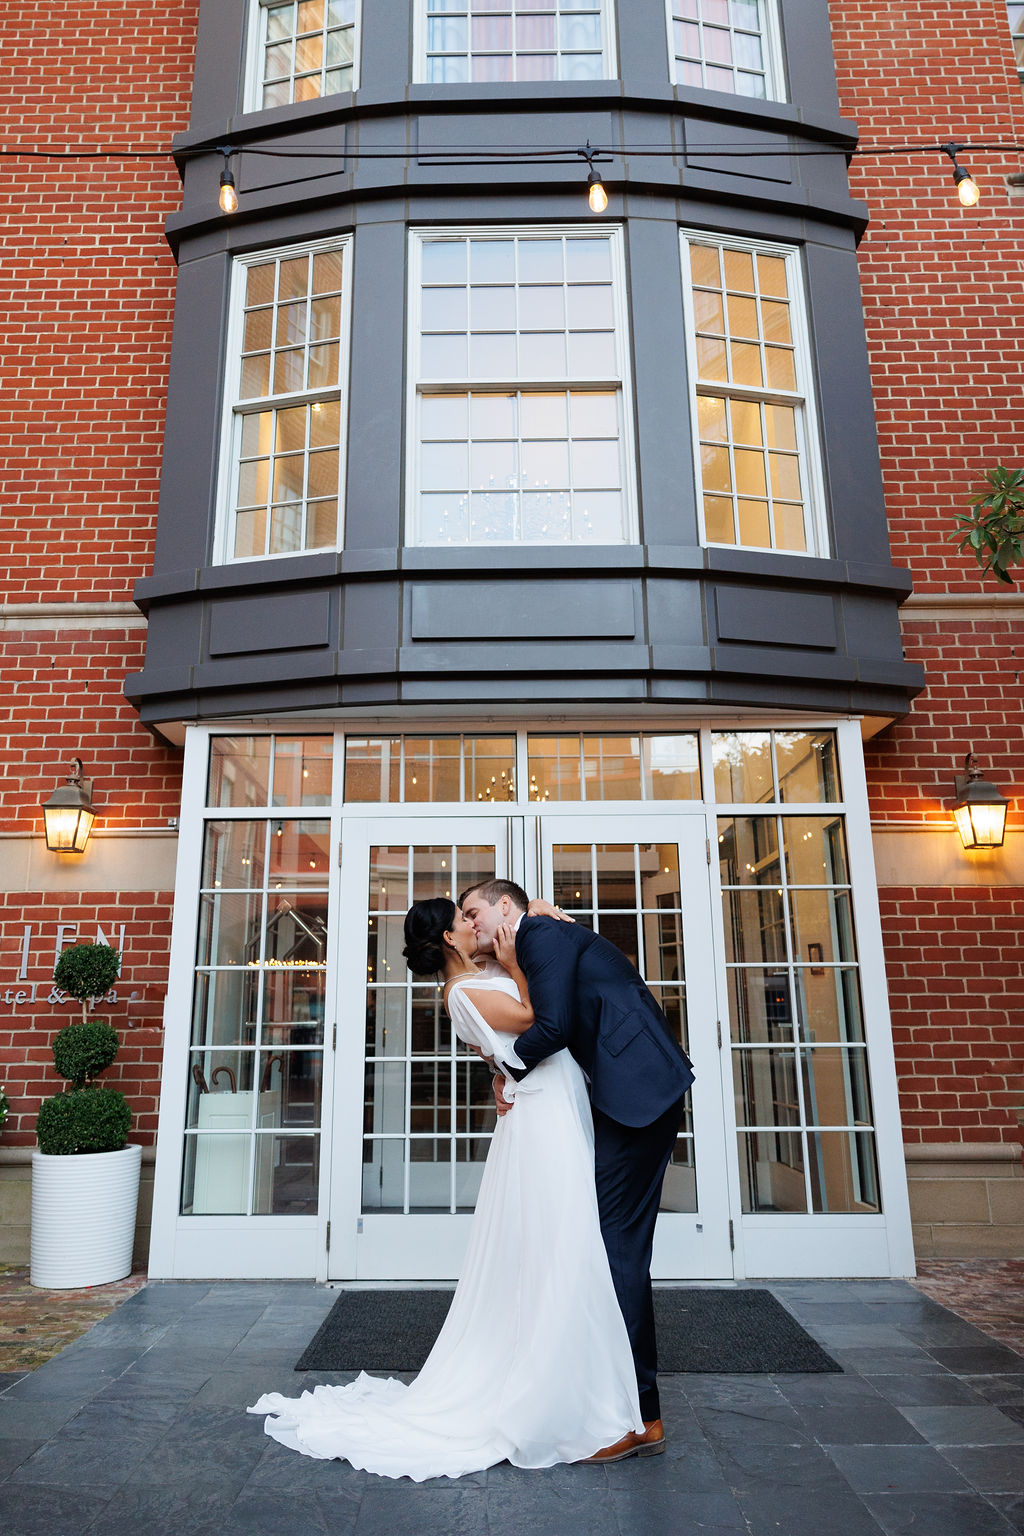 Newlyweds kiss at the front entrance to the lorien hotel wedding venue